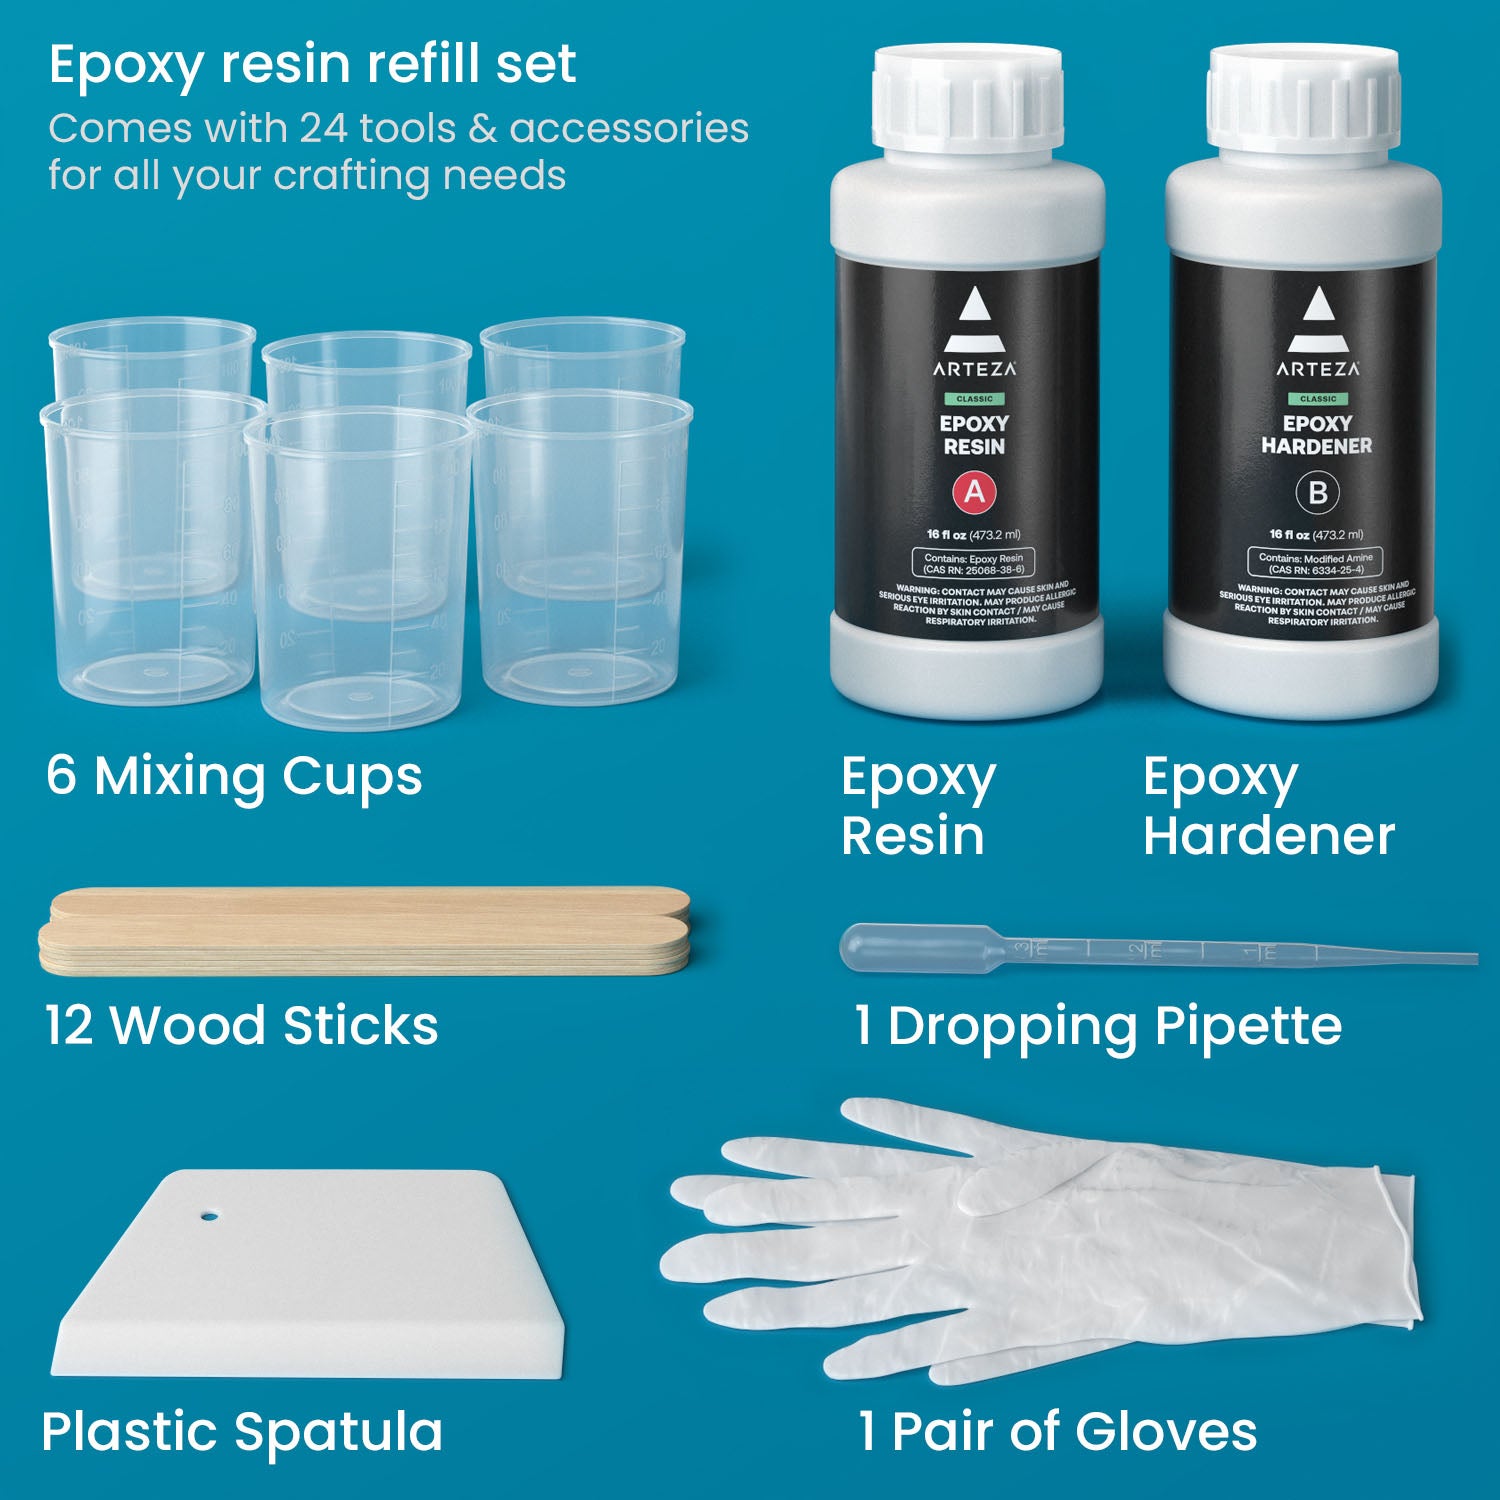 32oz. Epoxy Resin Refill Set with Accessories –